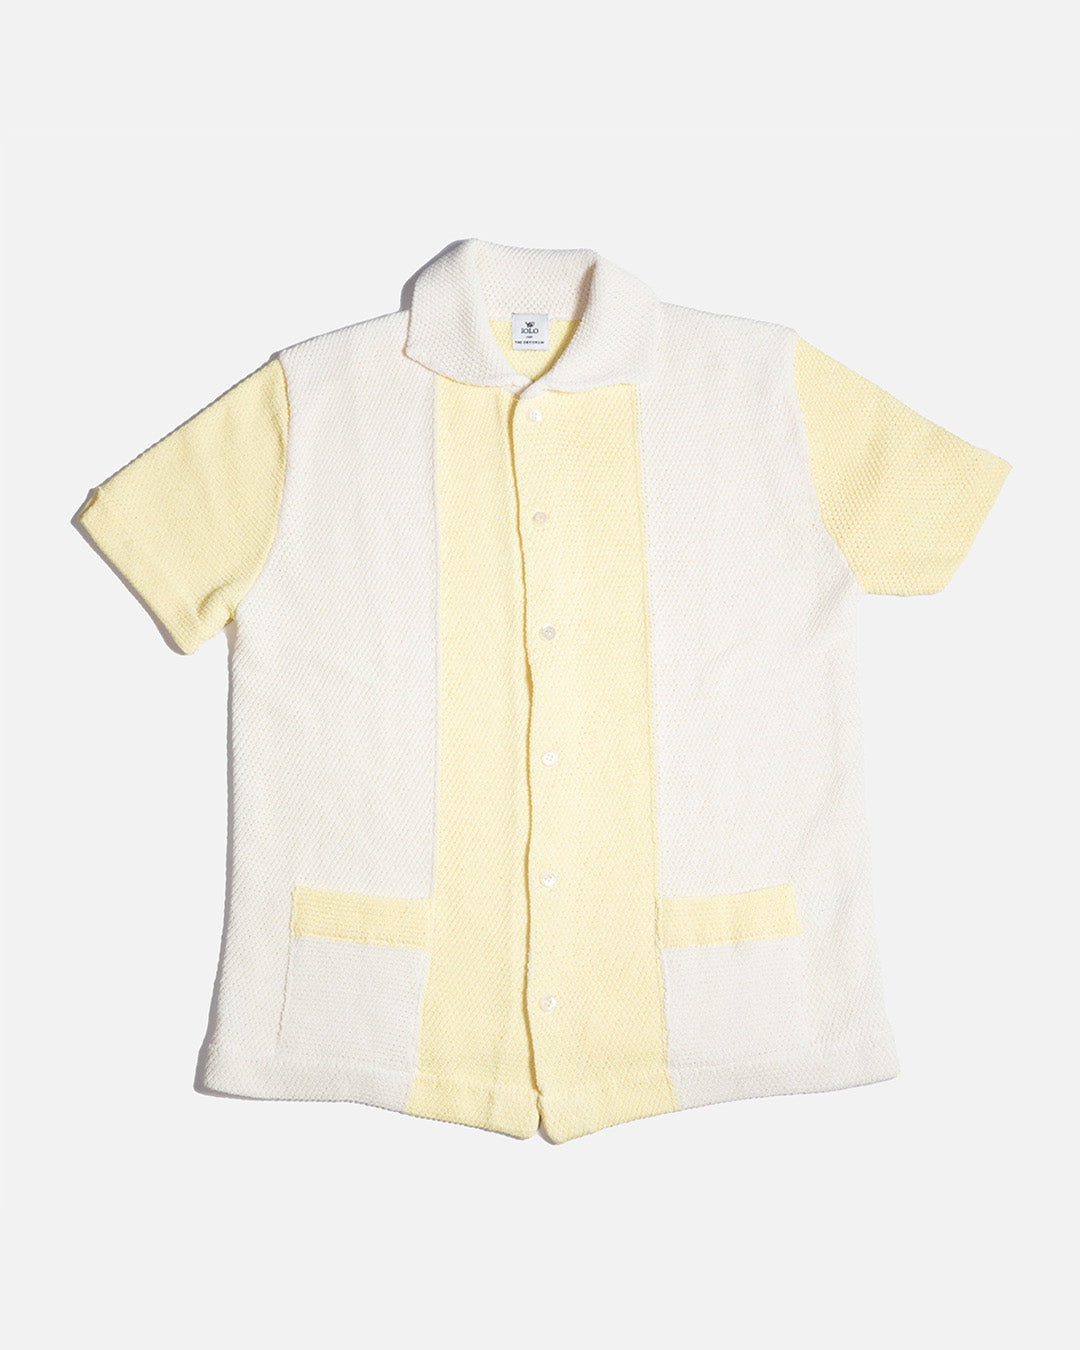 Iolo Ripley Knitted Shirt Ivory